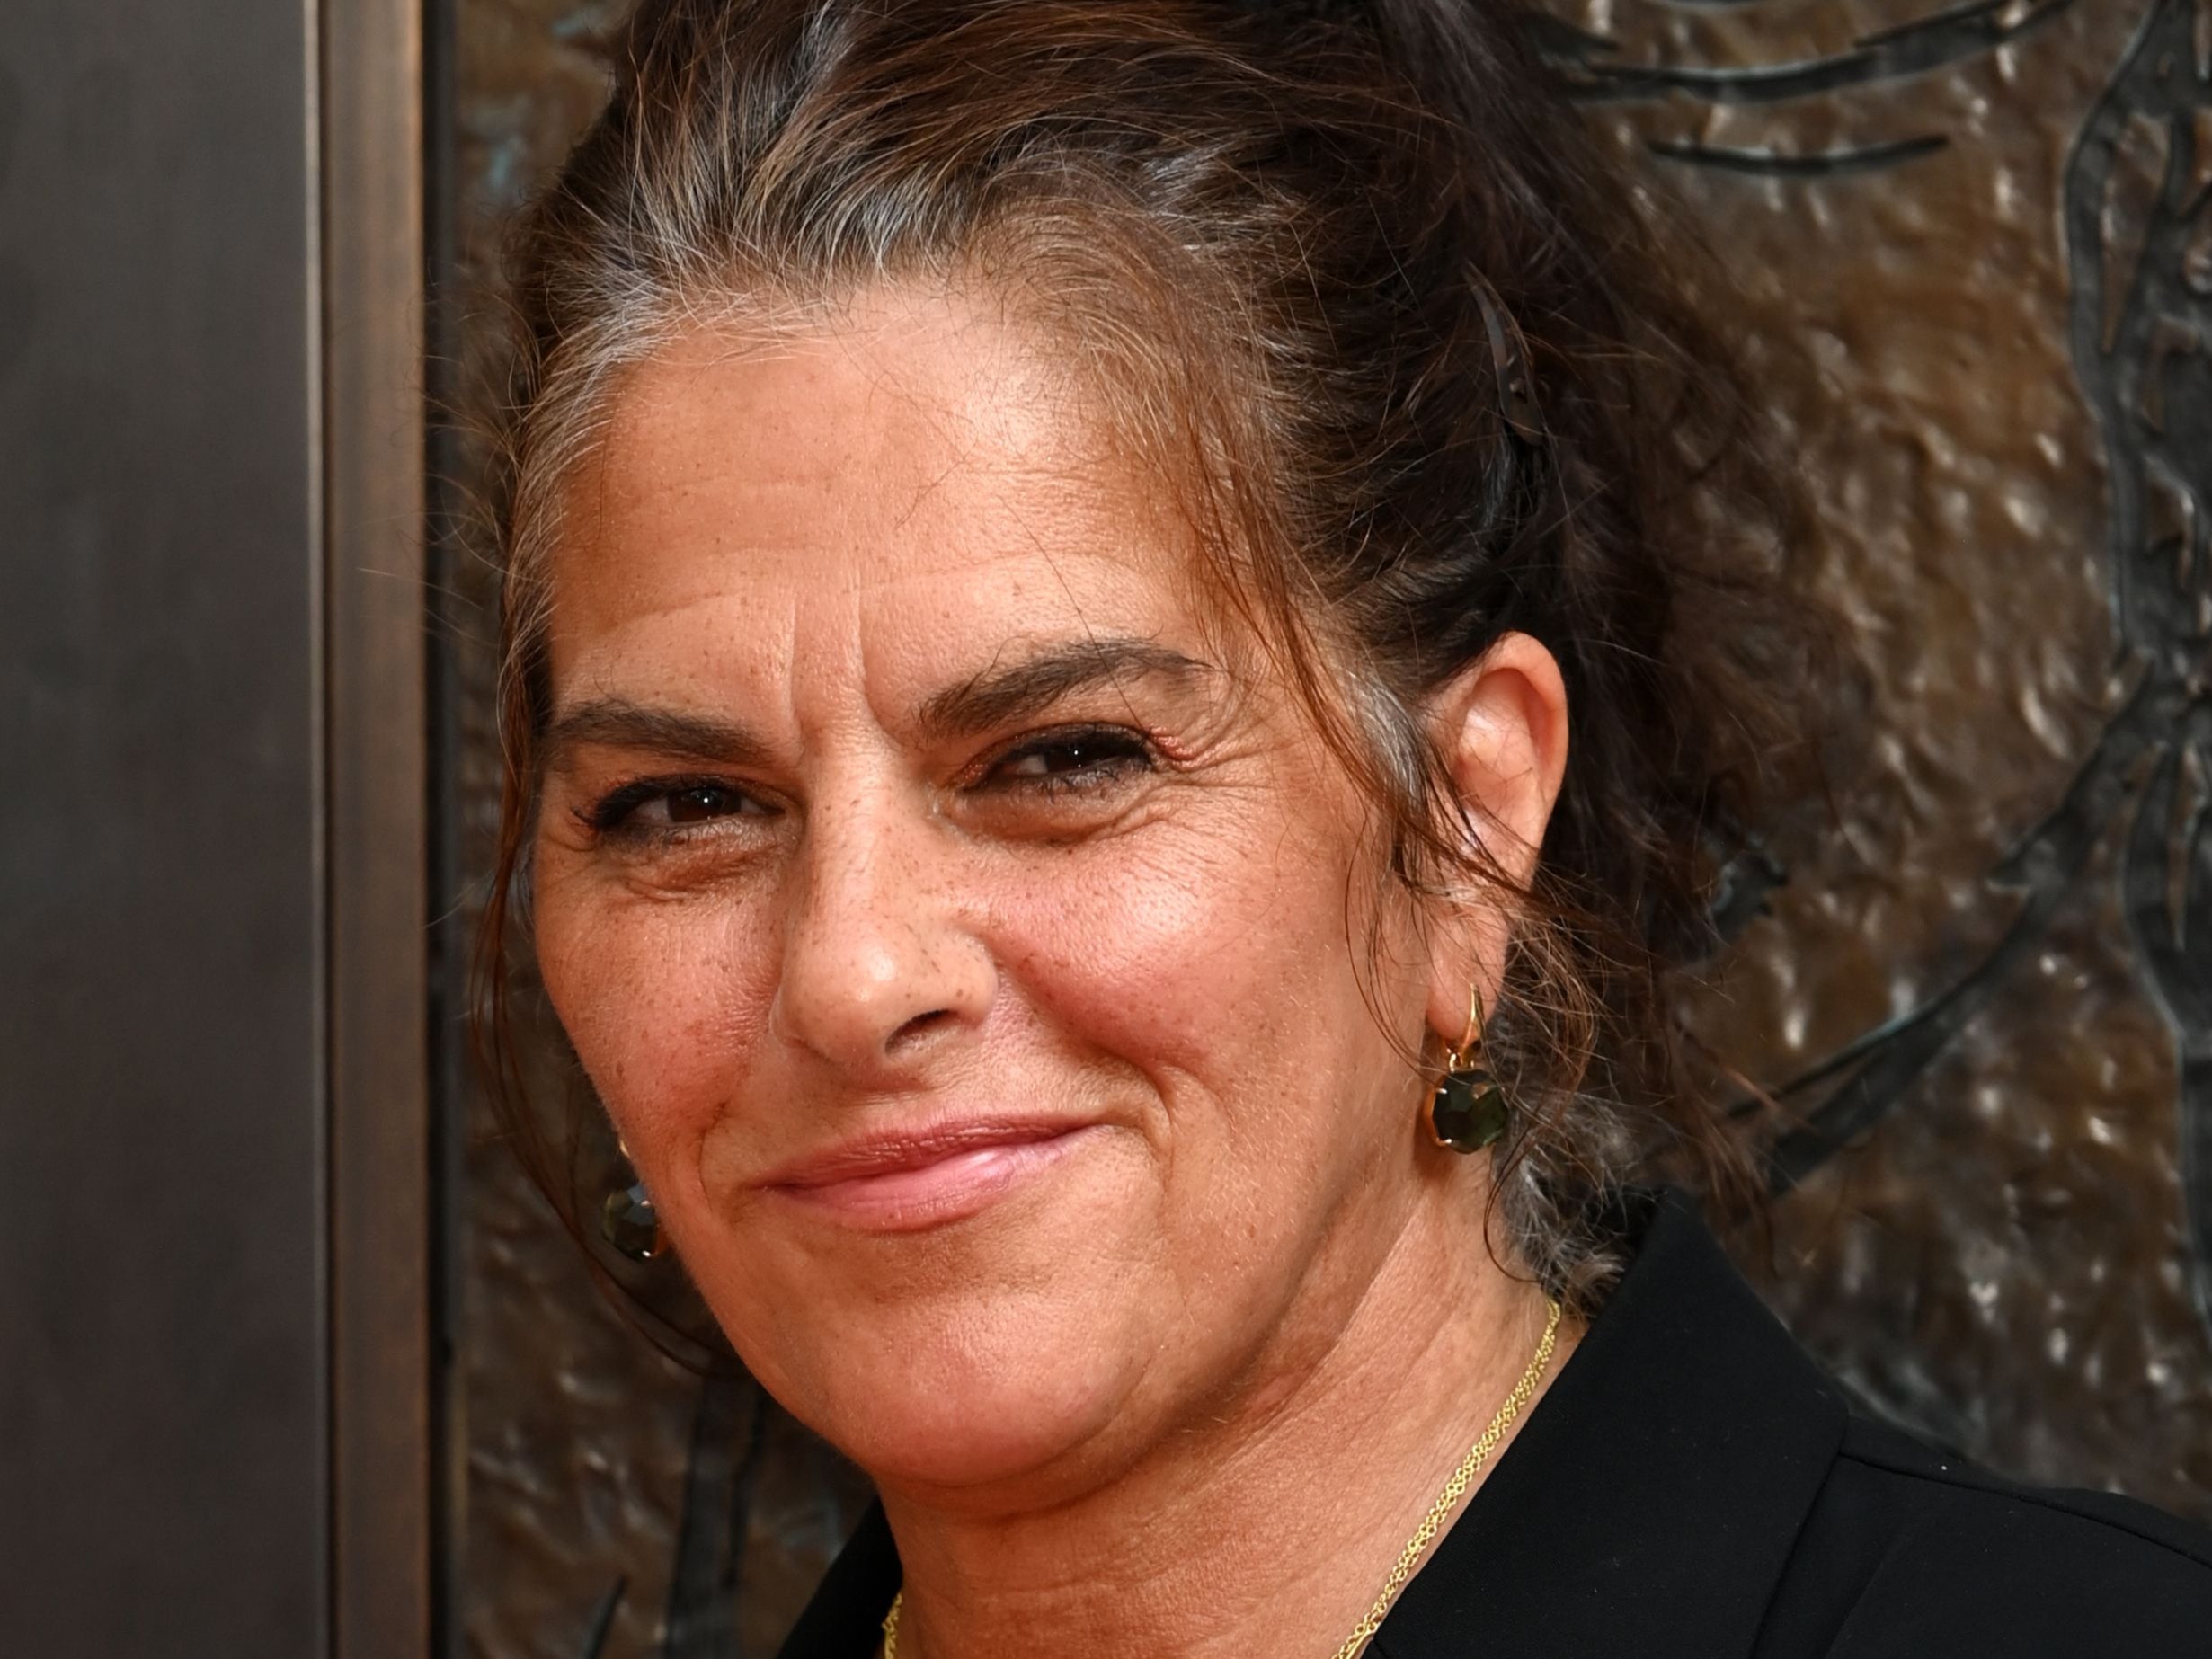 Artist Tracey Emin has also been recognized in the King's birthday honors list